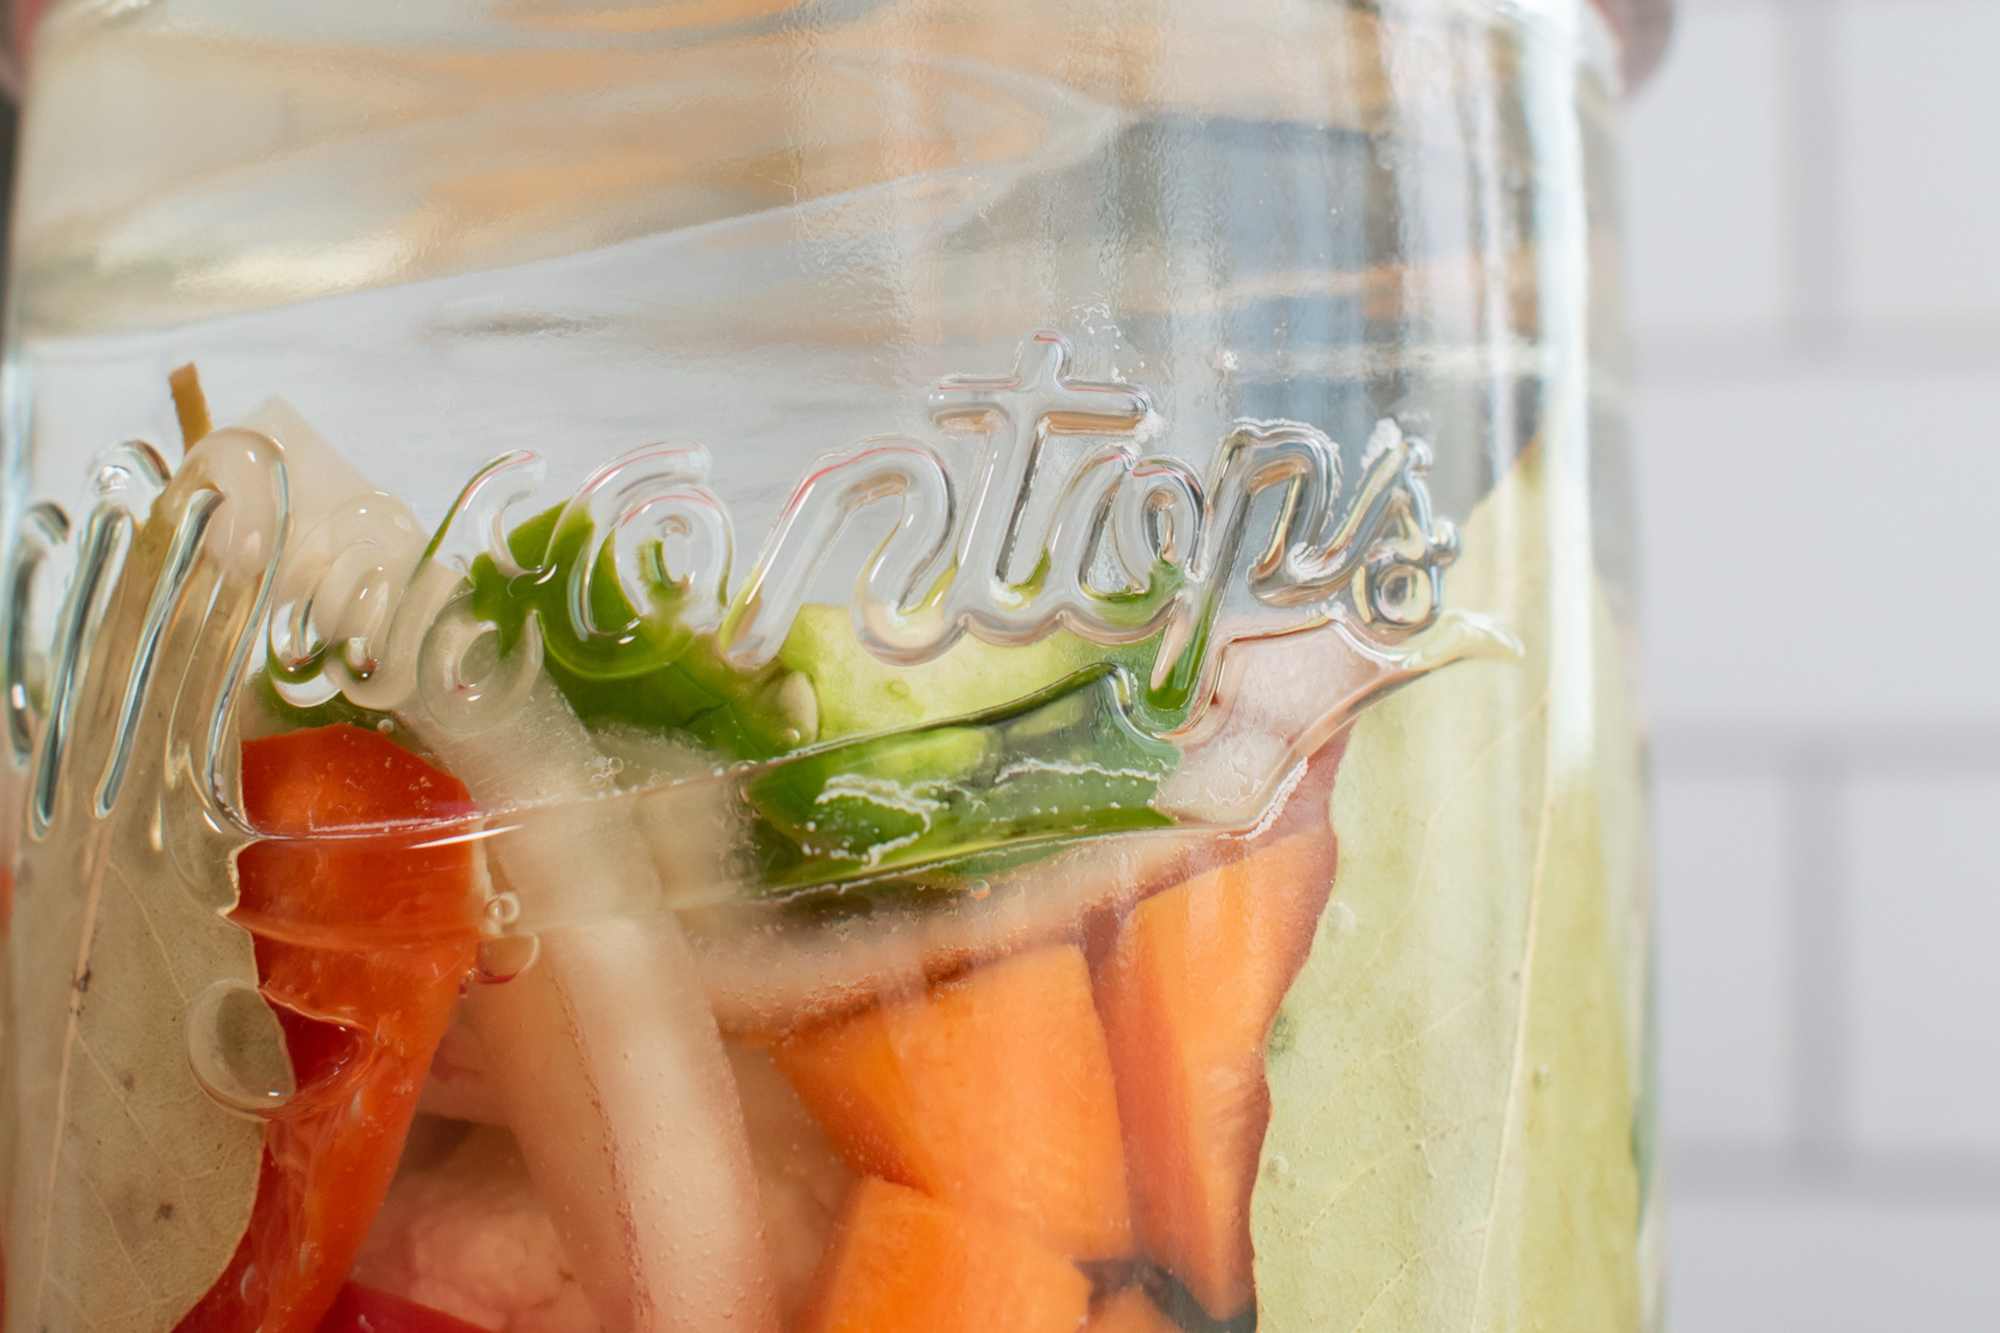 Preventing Mold Growth in Your Fermented Veggies